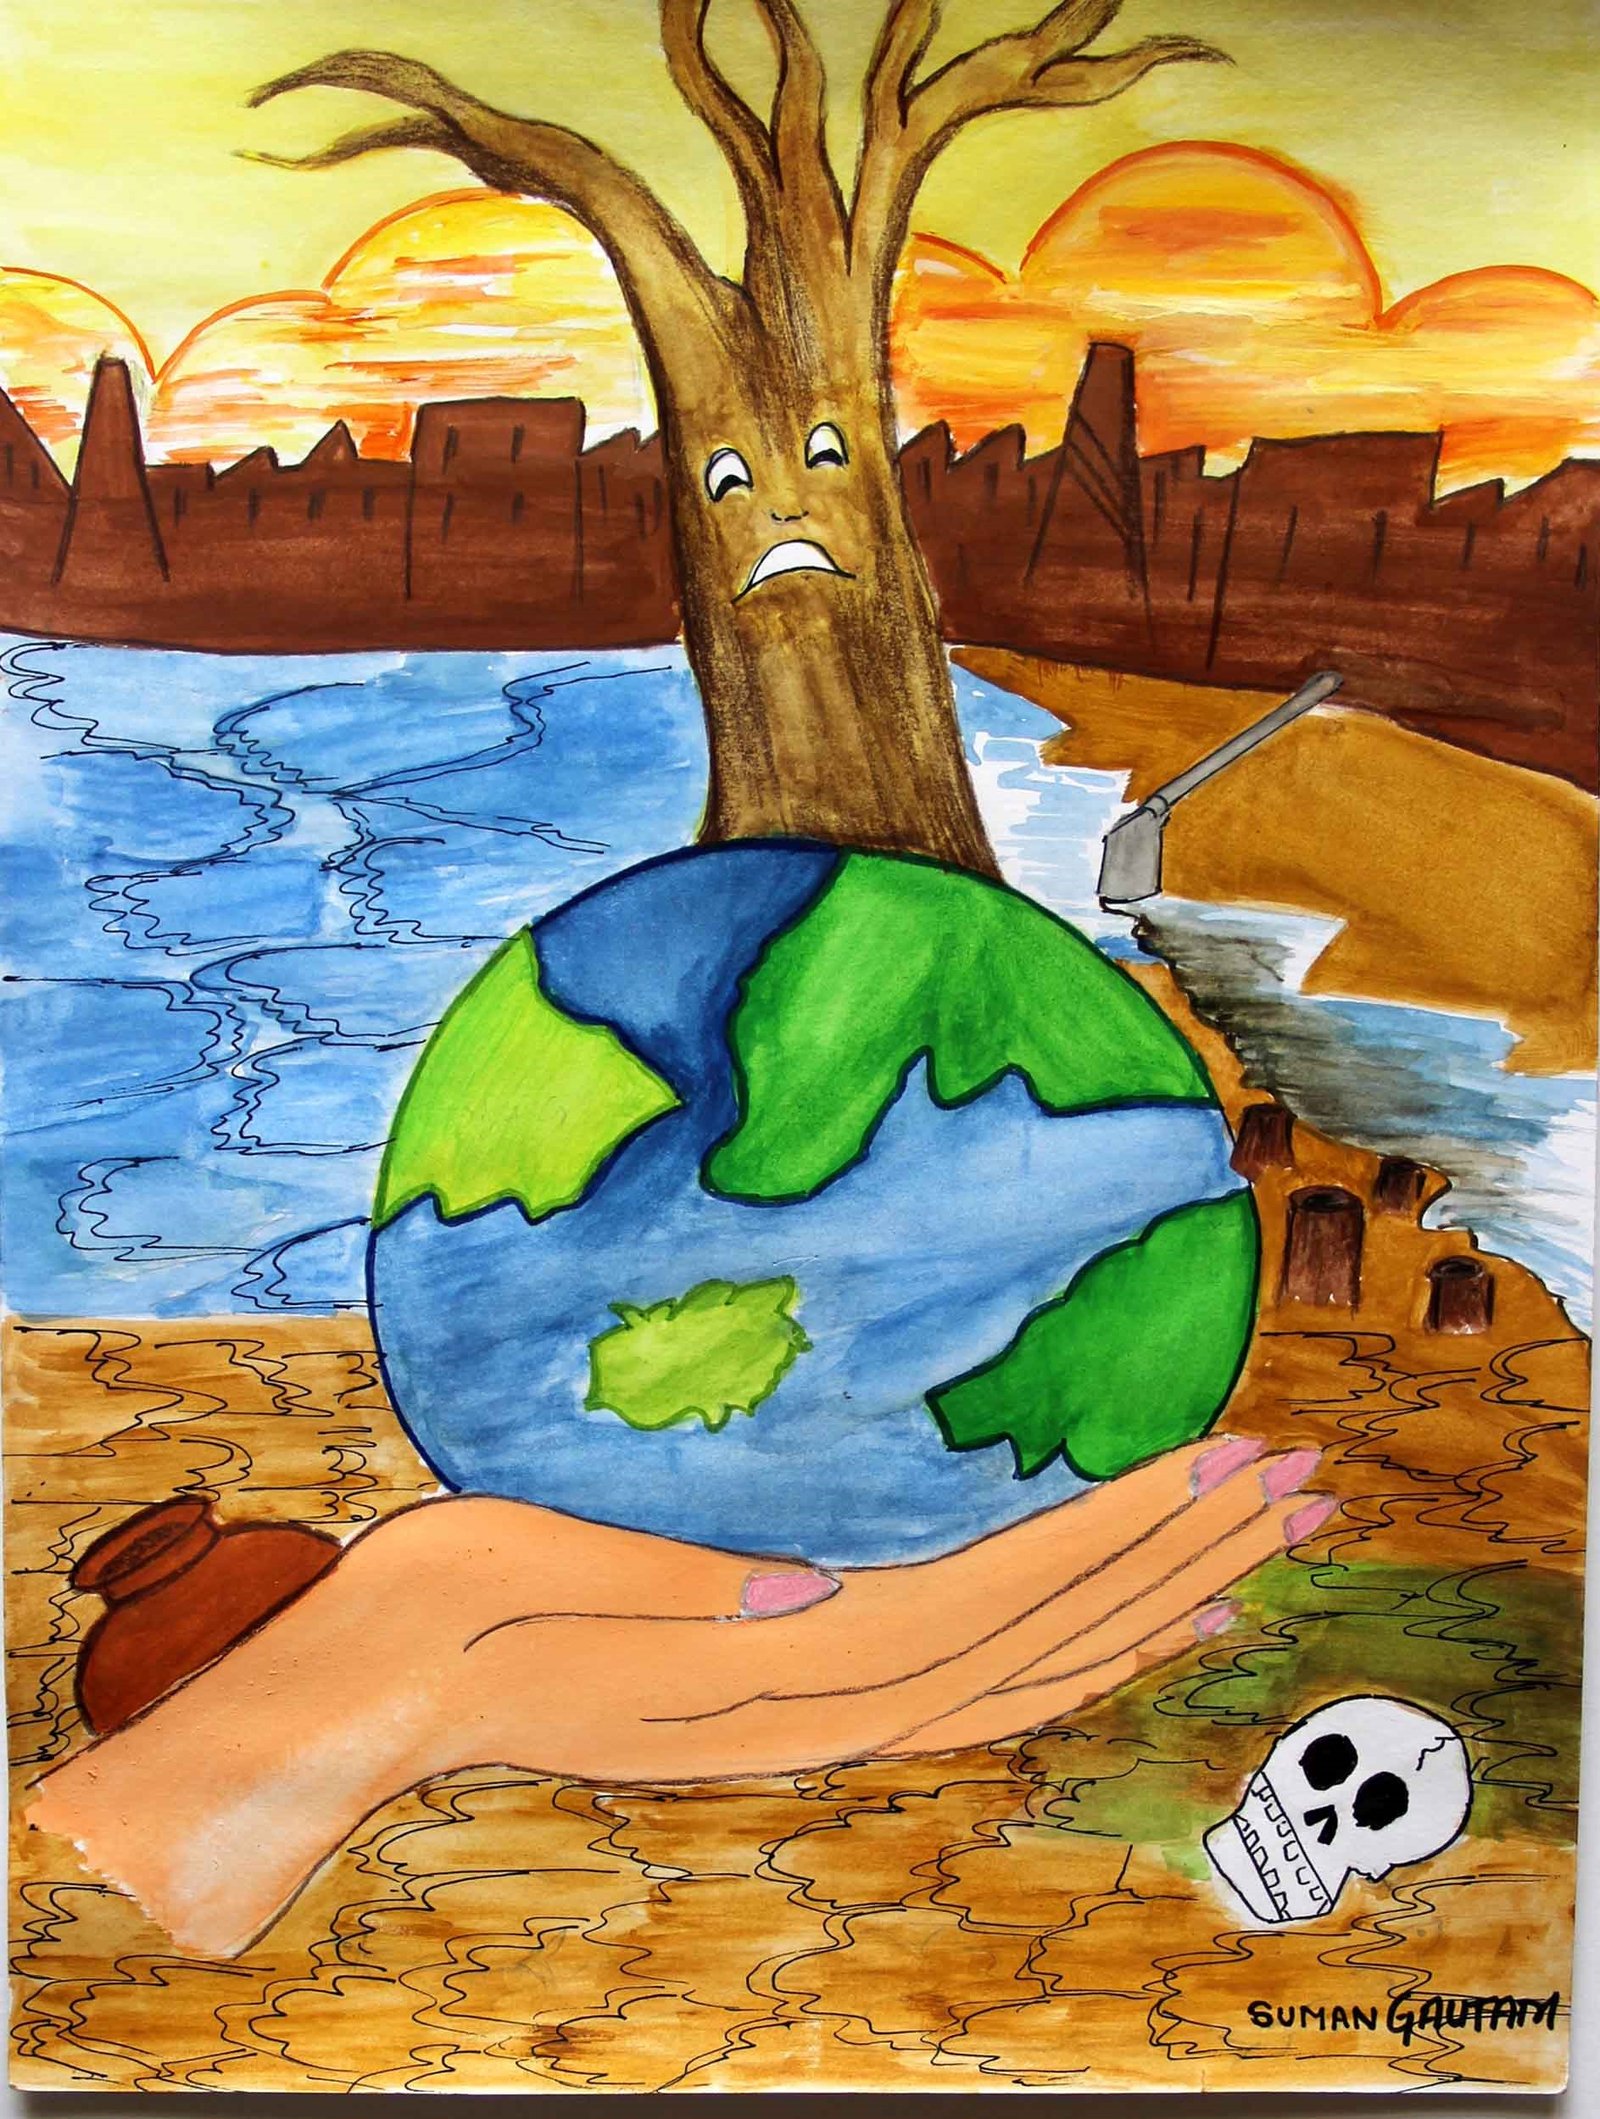 Save Environment and tree poster ideas | The EcoBuzz